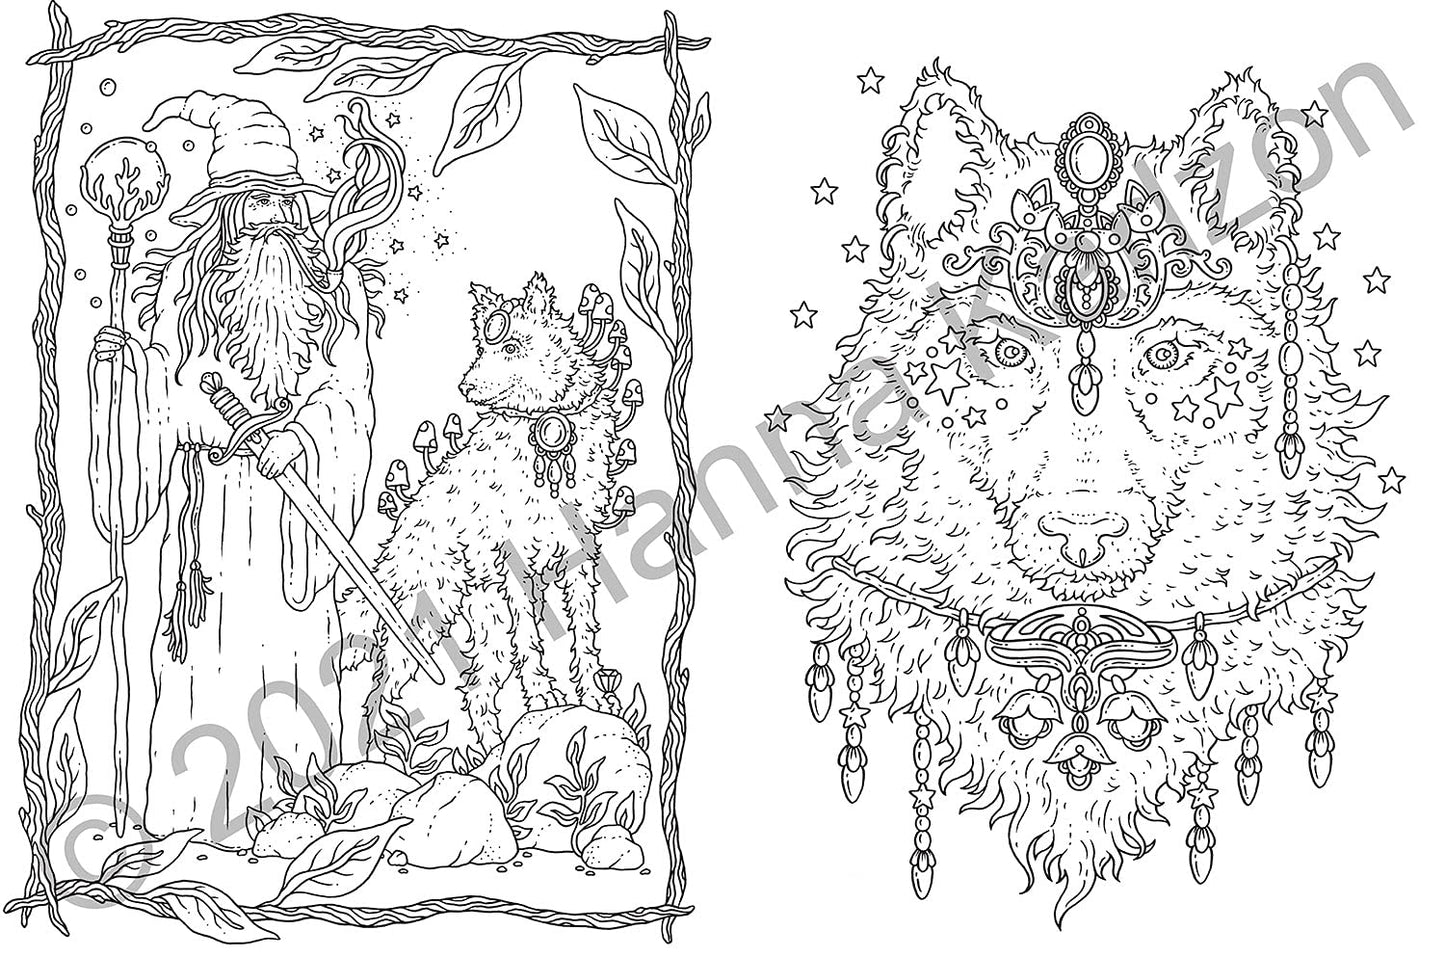 Tales from the Forest Kingdom Coloring Book by Hanna Karlzon